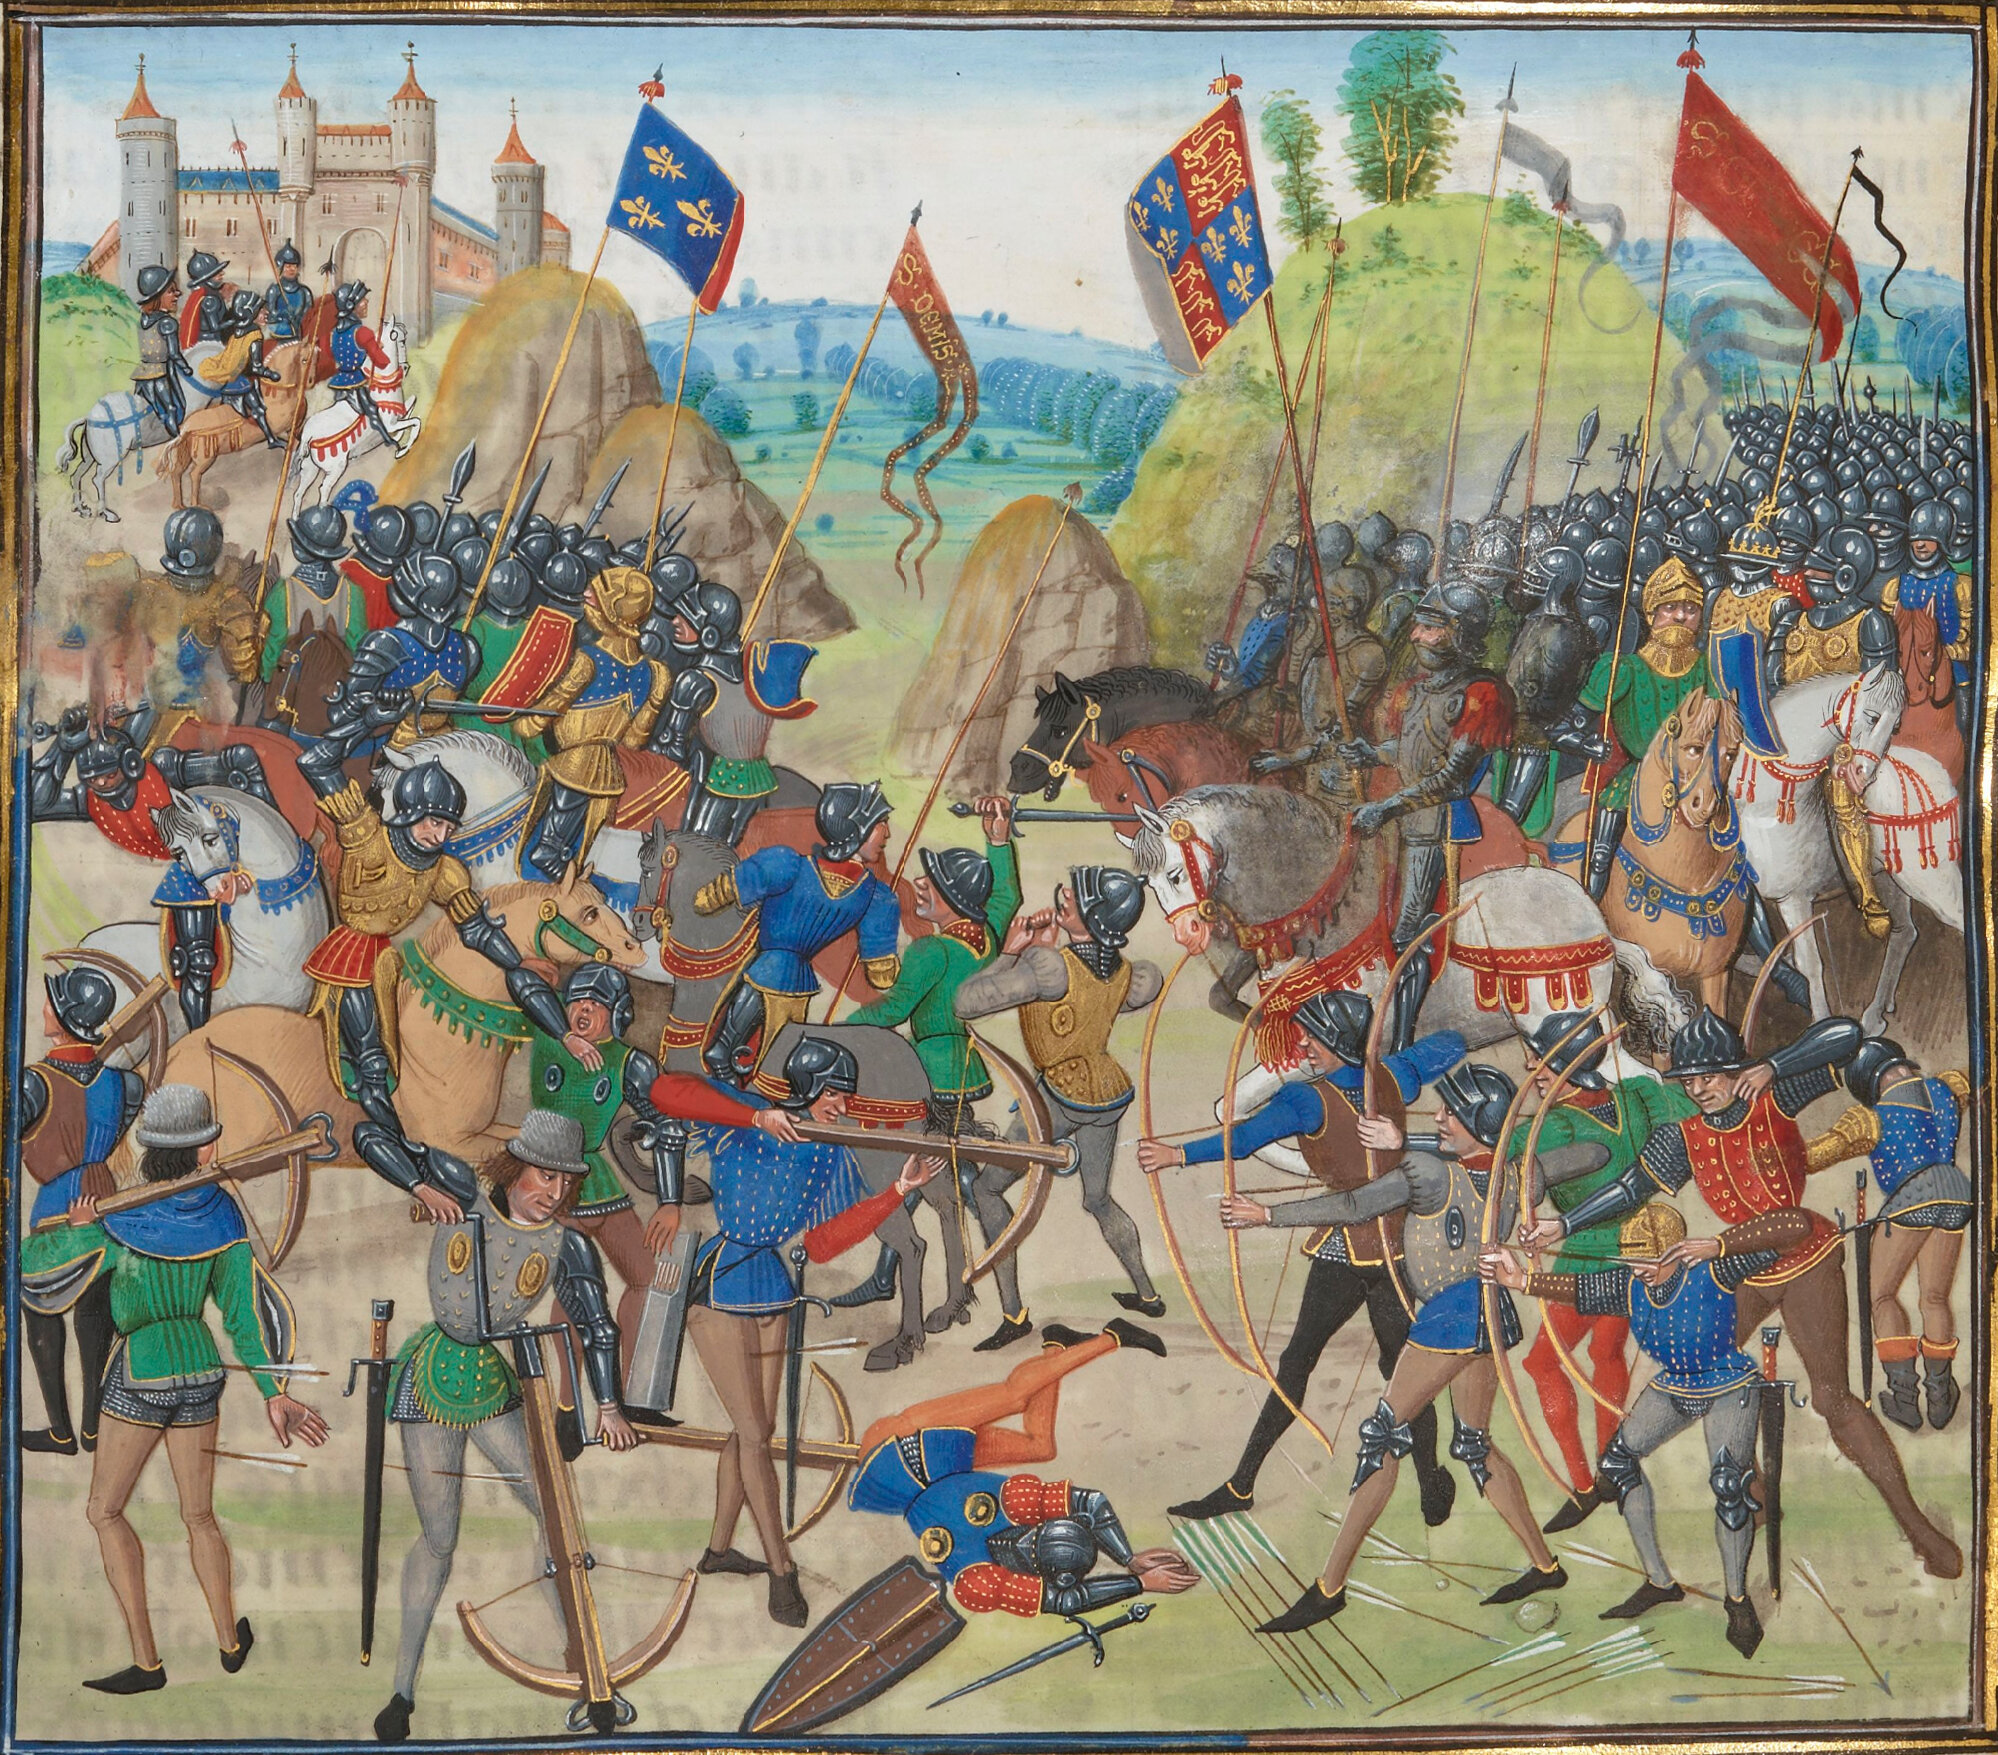 Battle of Crécy, 1346By Jean Froissart - From Chapter CXXIX of Jean Froissart’s Chronicles, example source at http://www.maisonstclaire.org/resources/chronicles/froissart/book_1/ch_126-150/fc_b1_chap129.html, Public Domain, https://commons.wikimedia…